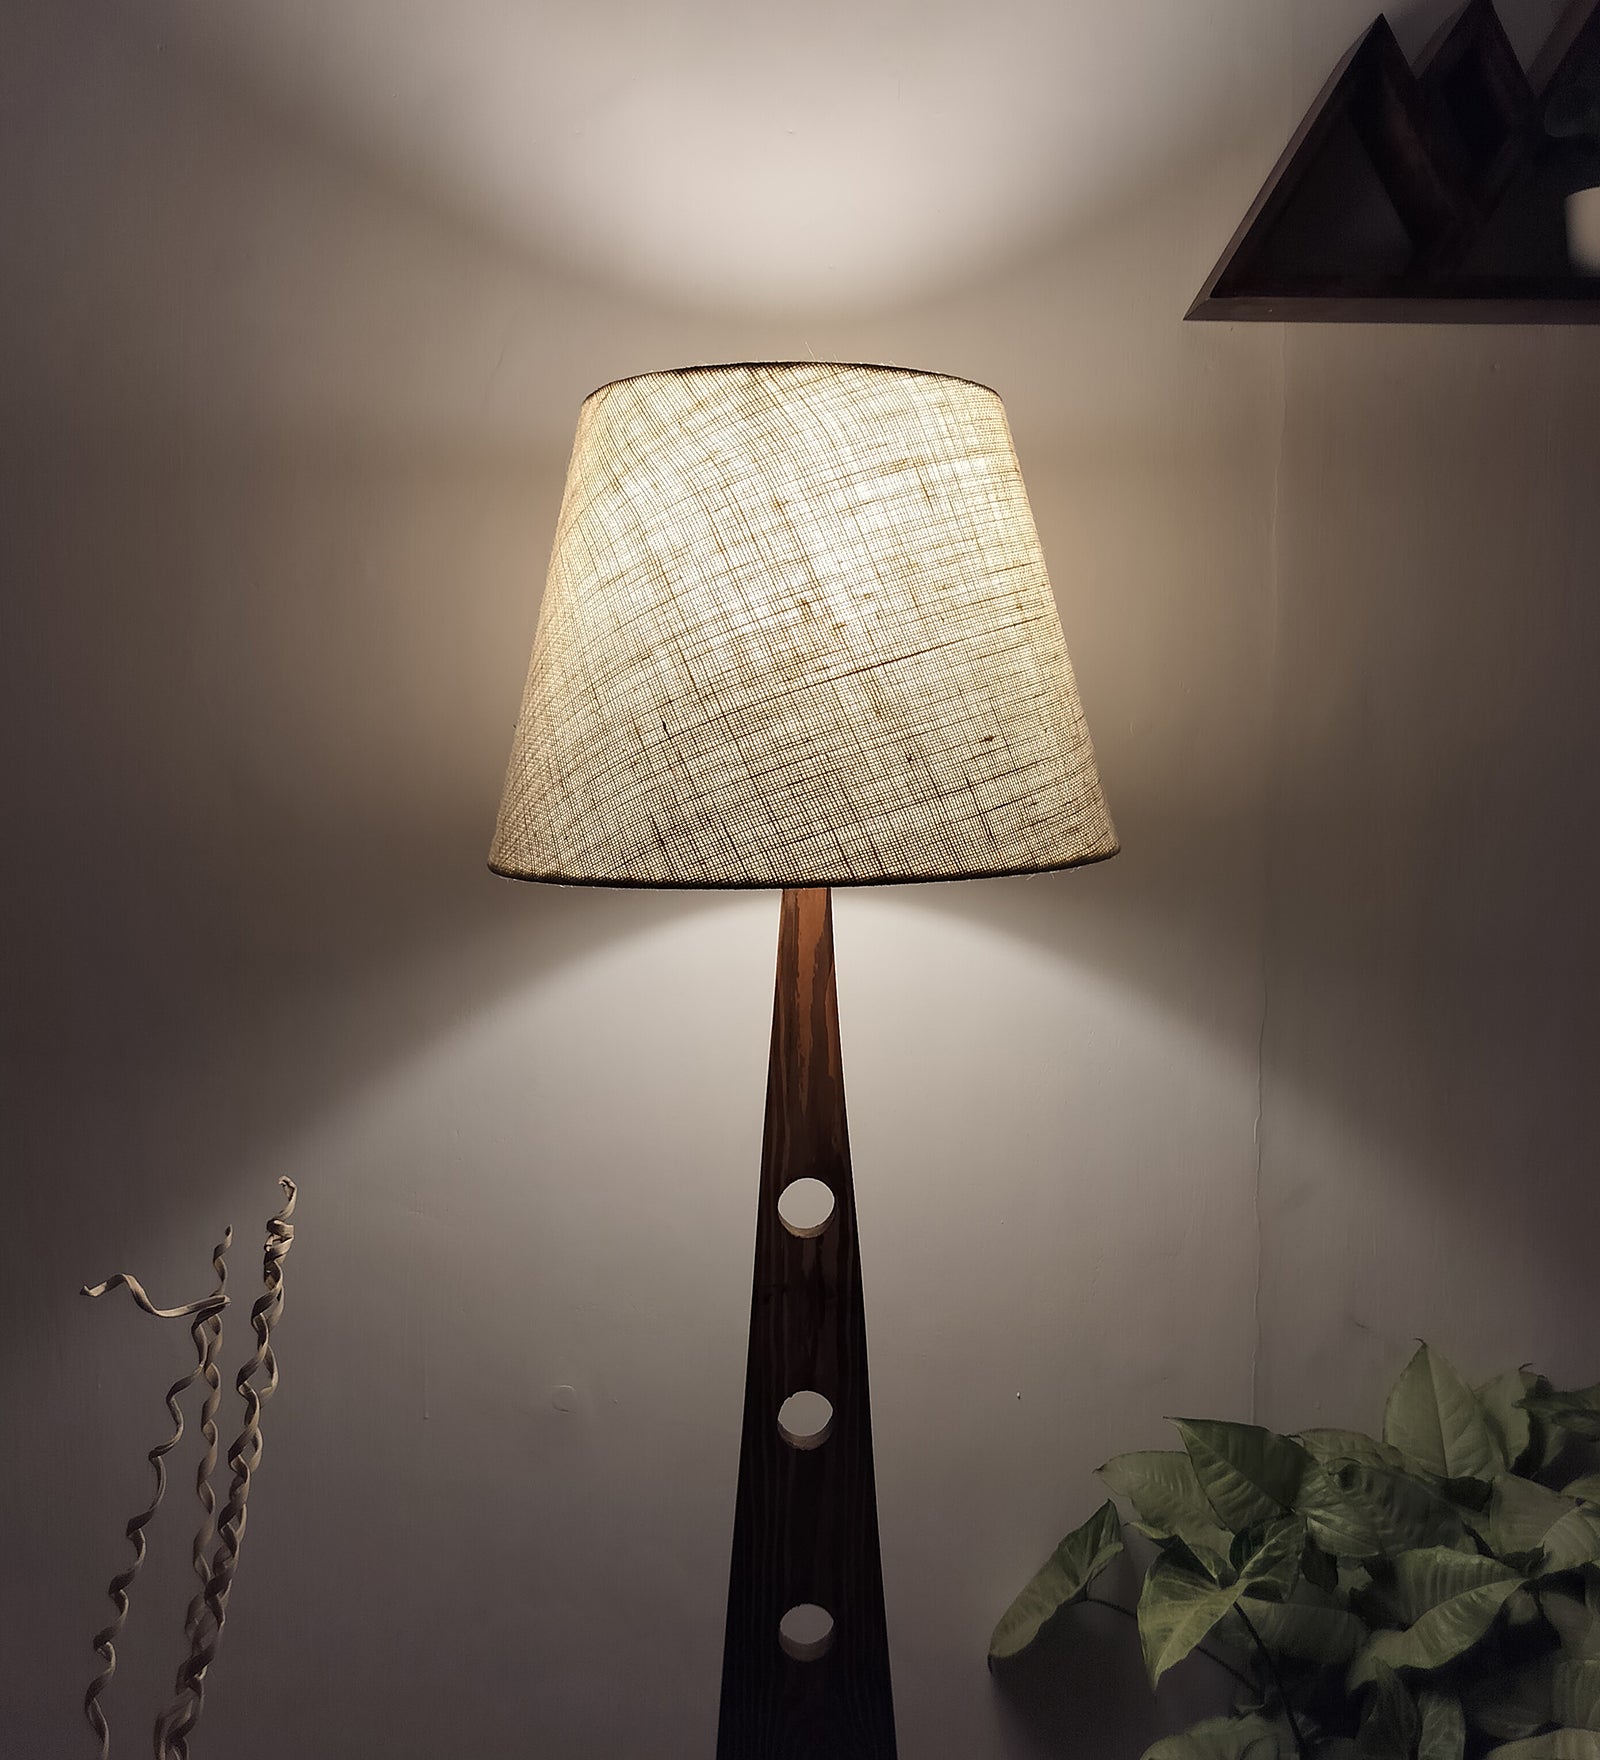 Bevel Wooden Floor Lamp with Brown Base and Yellow Printed Fabric Lampshade